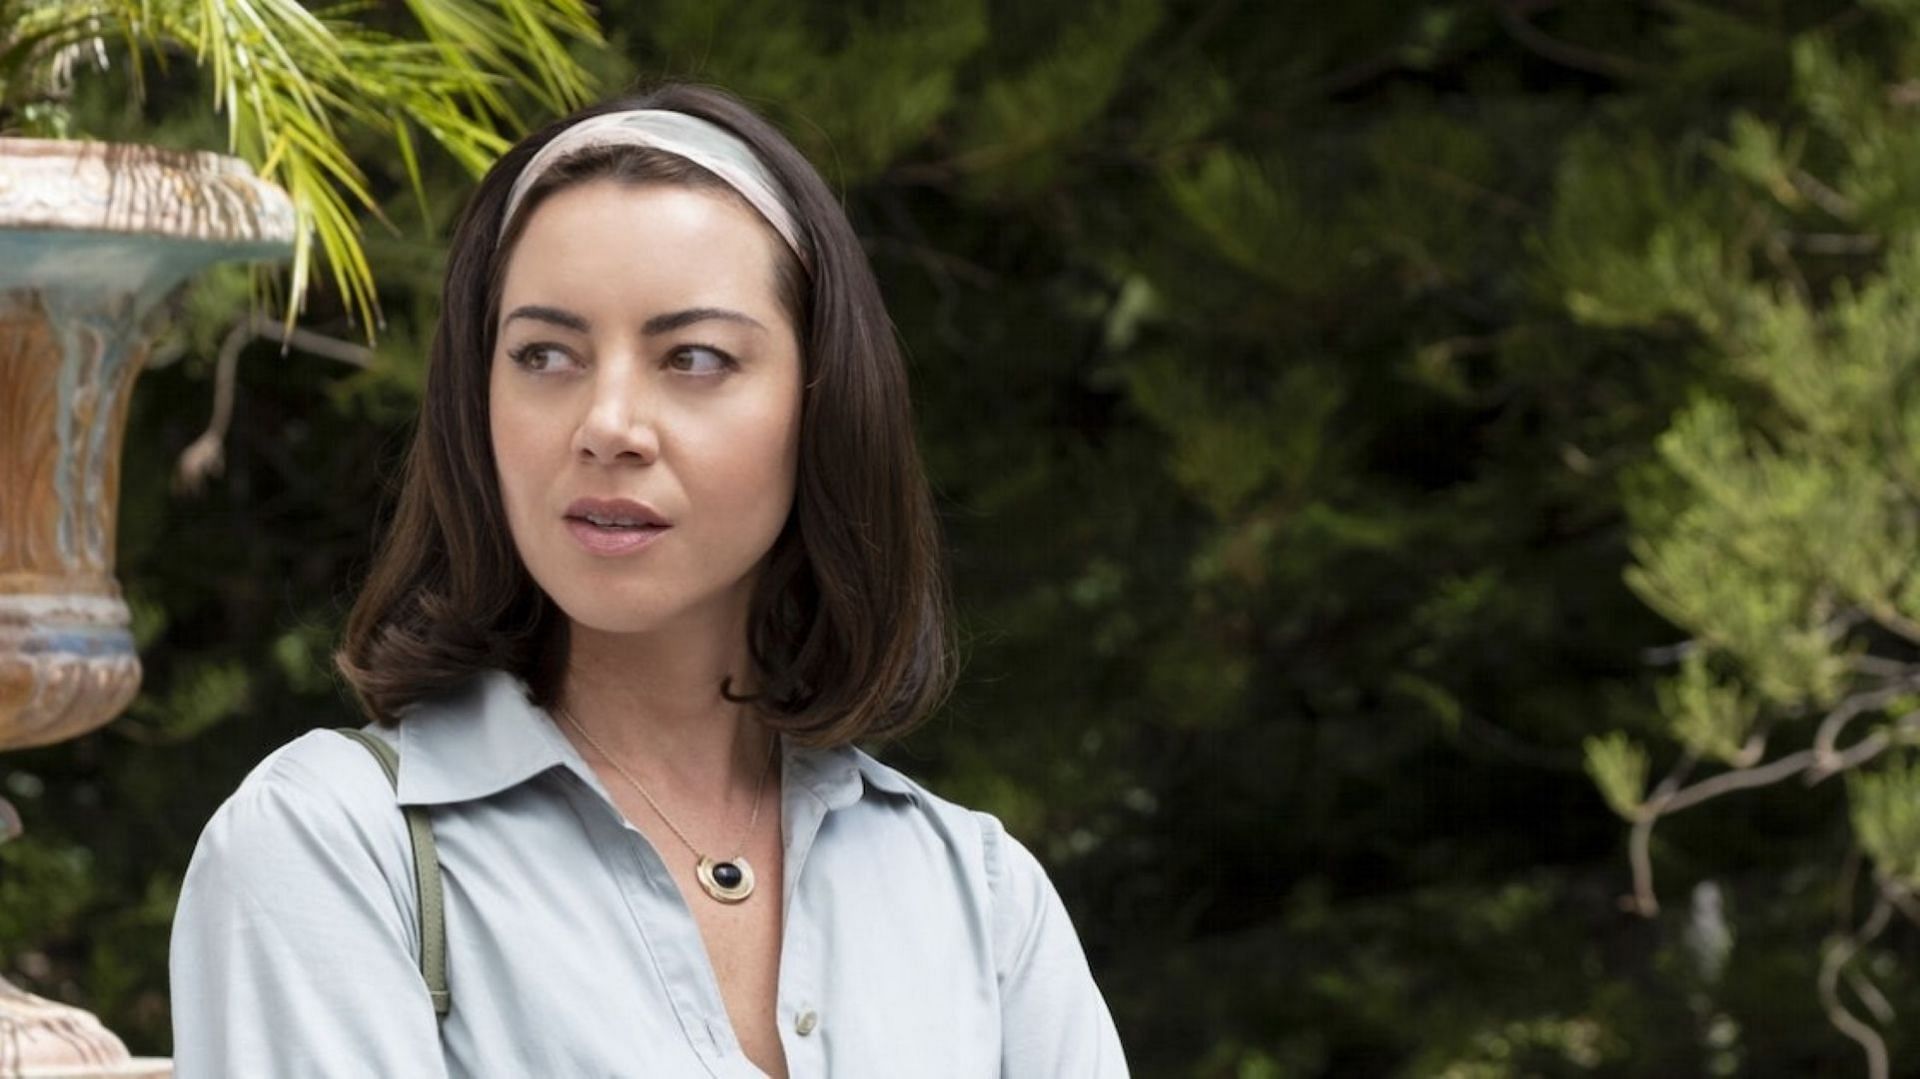 We Are So Ready for Aubrey Plaza to Join The White Lotus